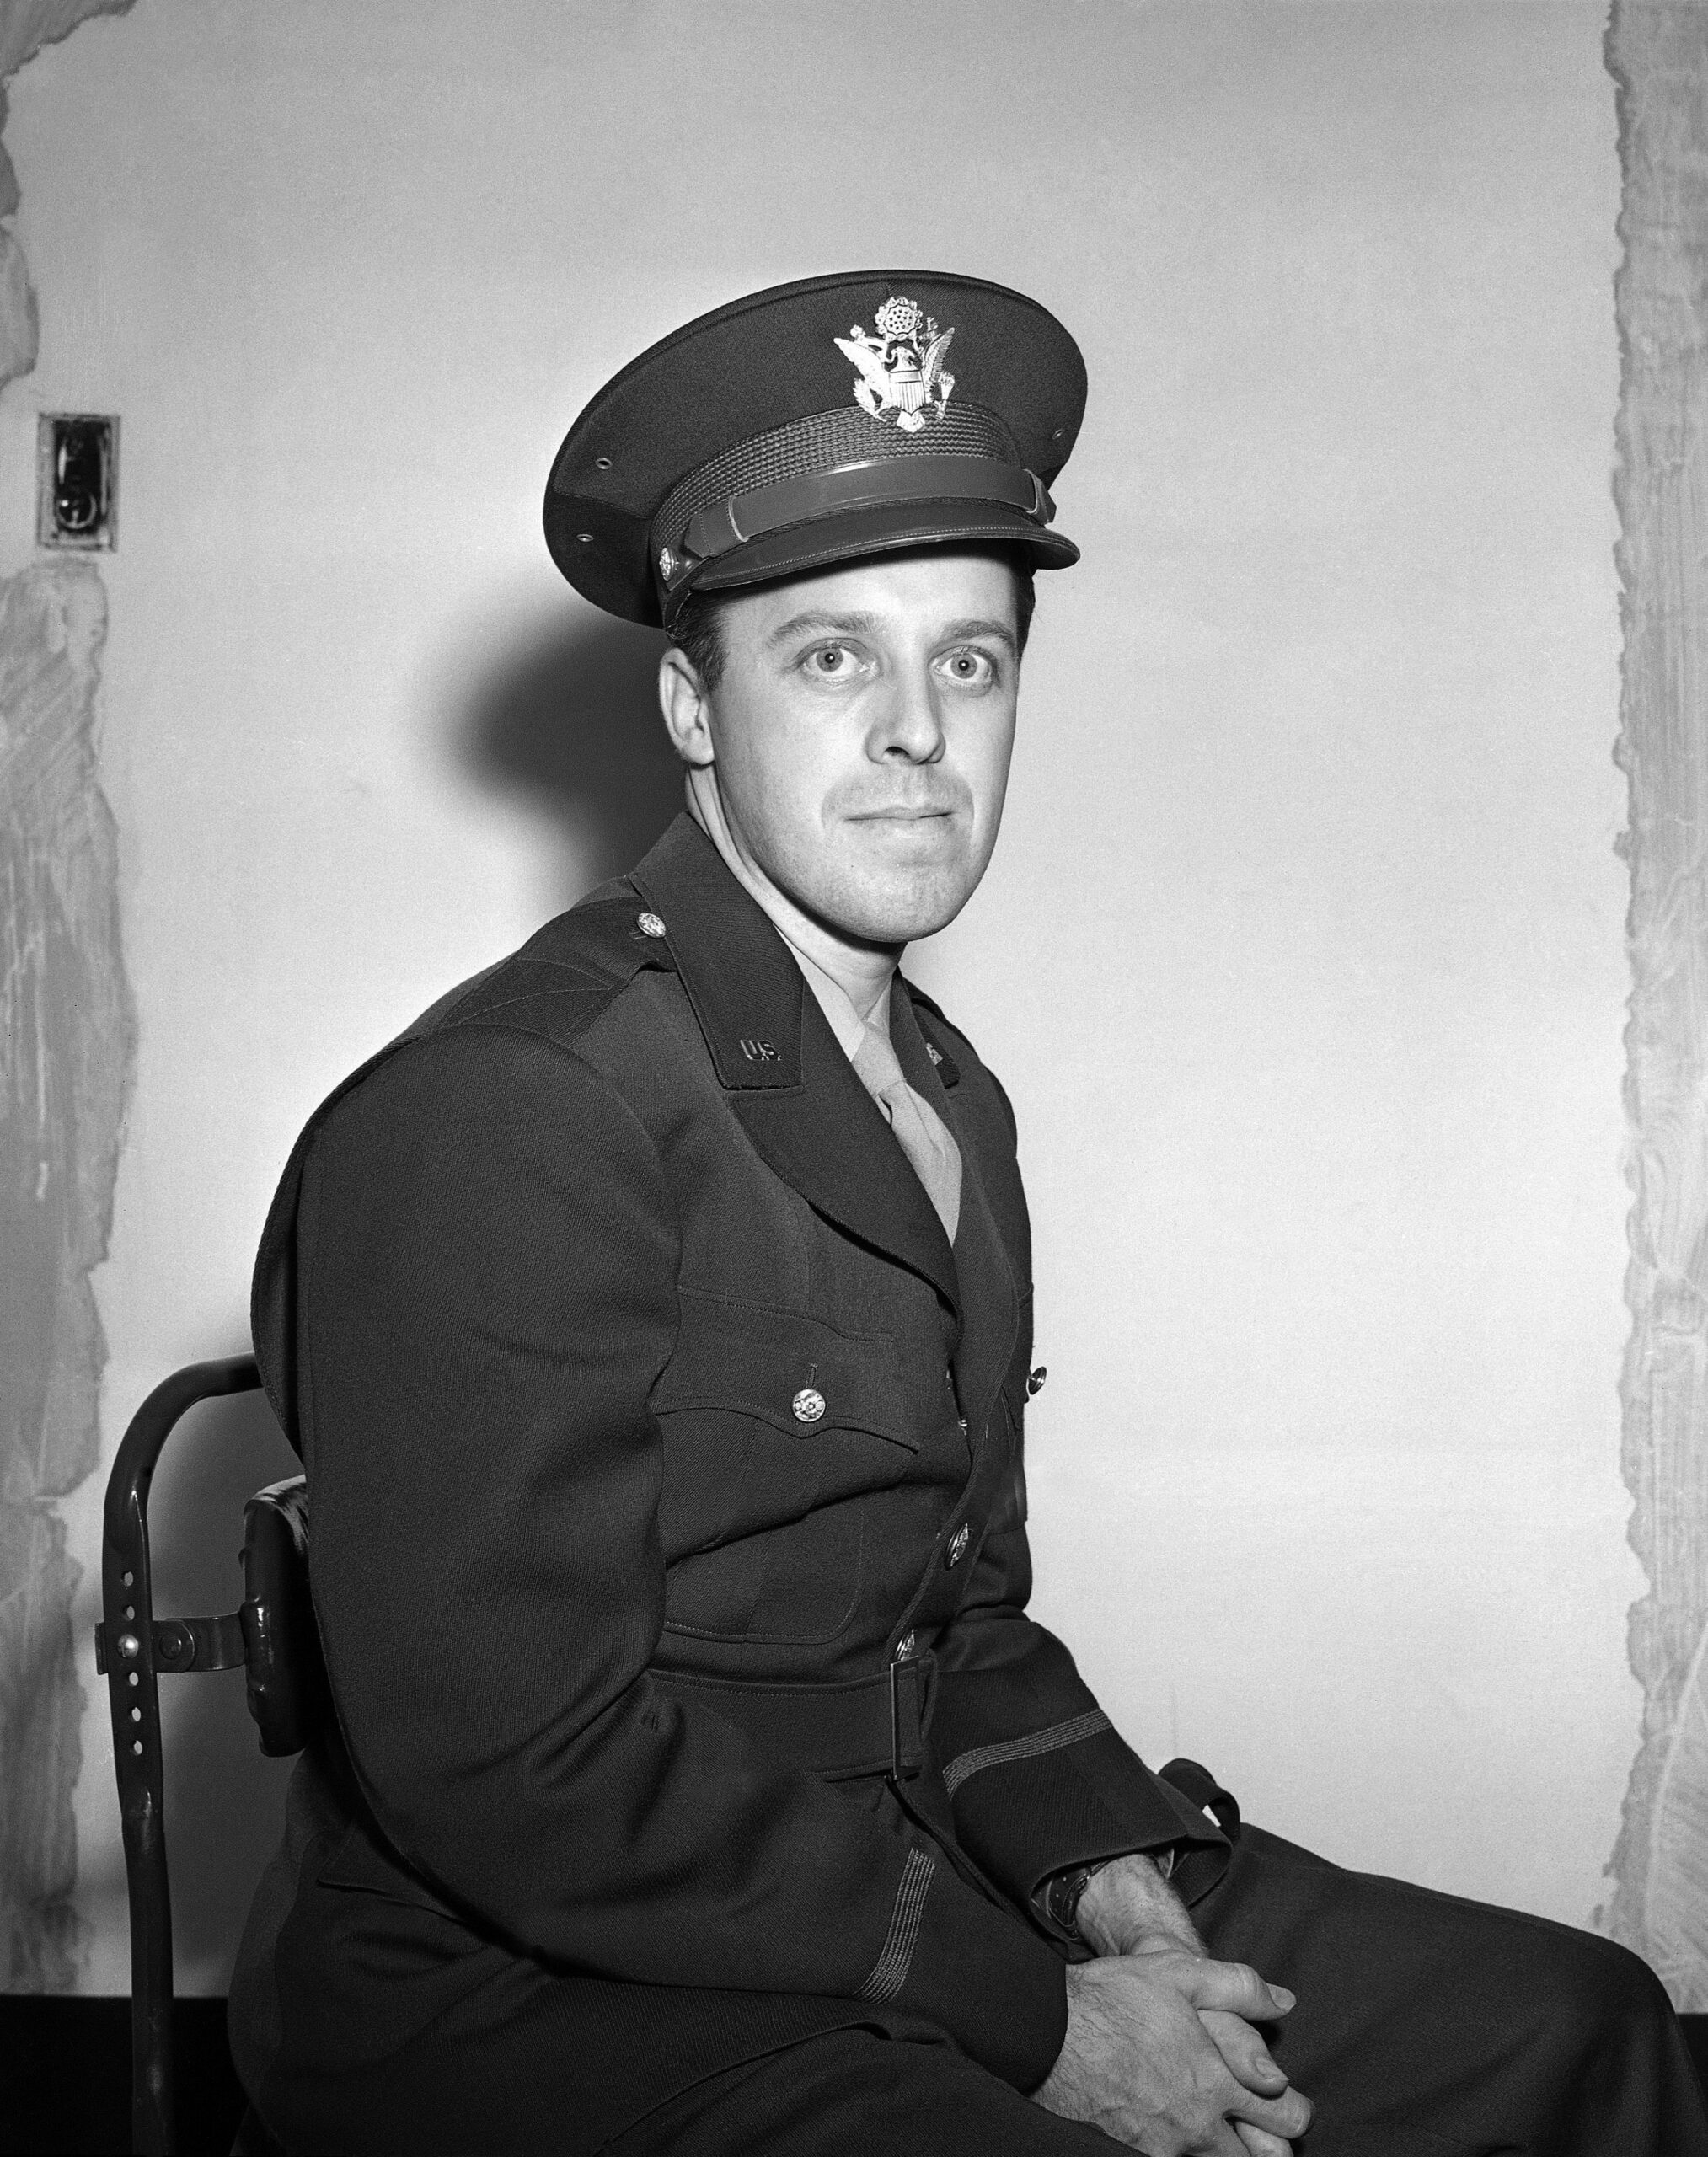 a black and white photograph of a journalist sitting for a portrait, wearing a U.S. military uniform